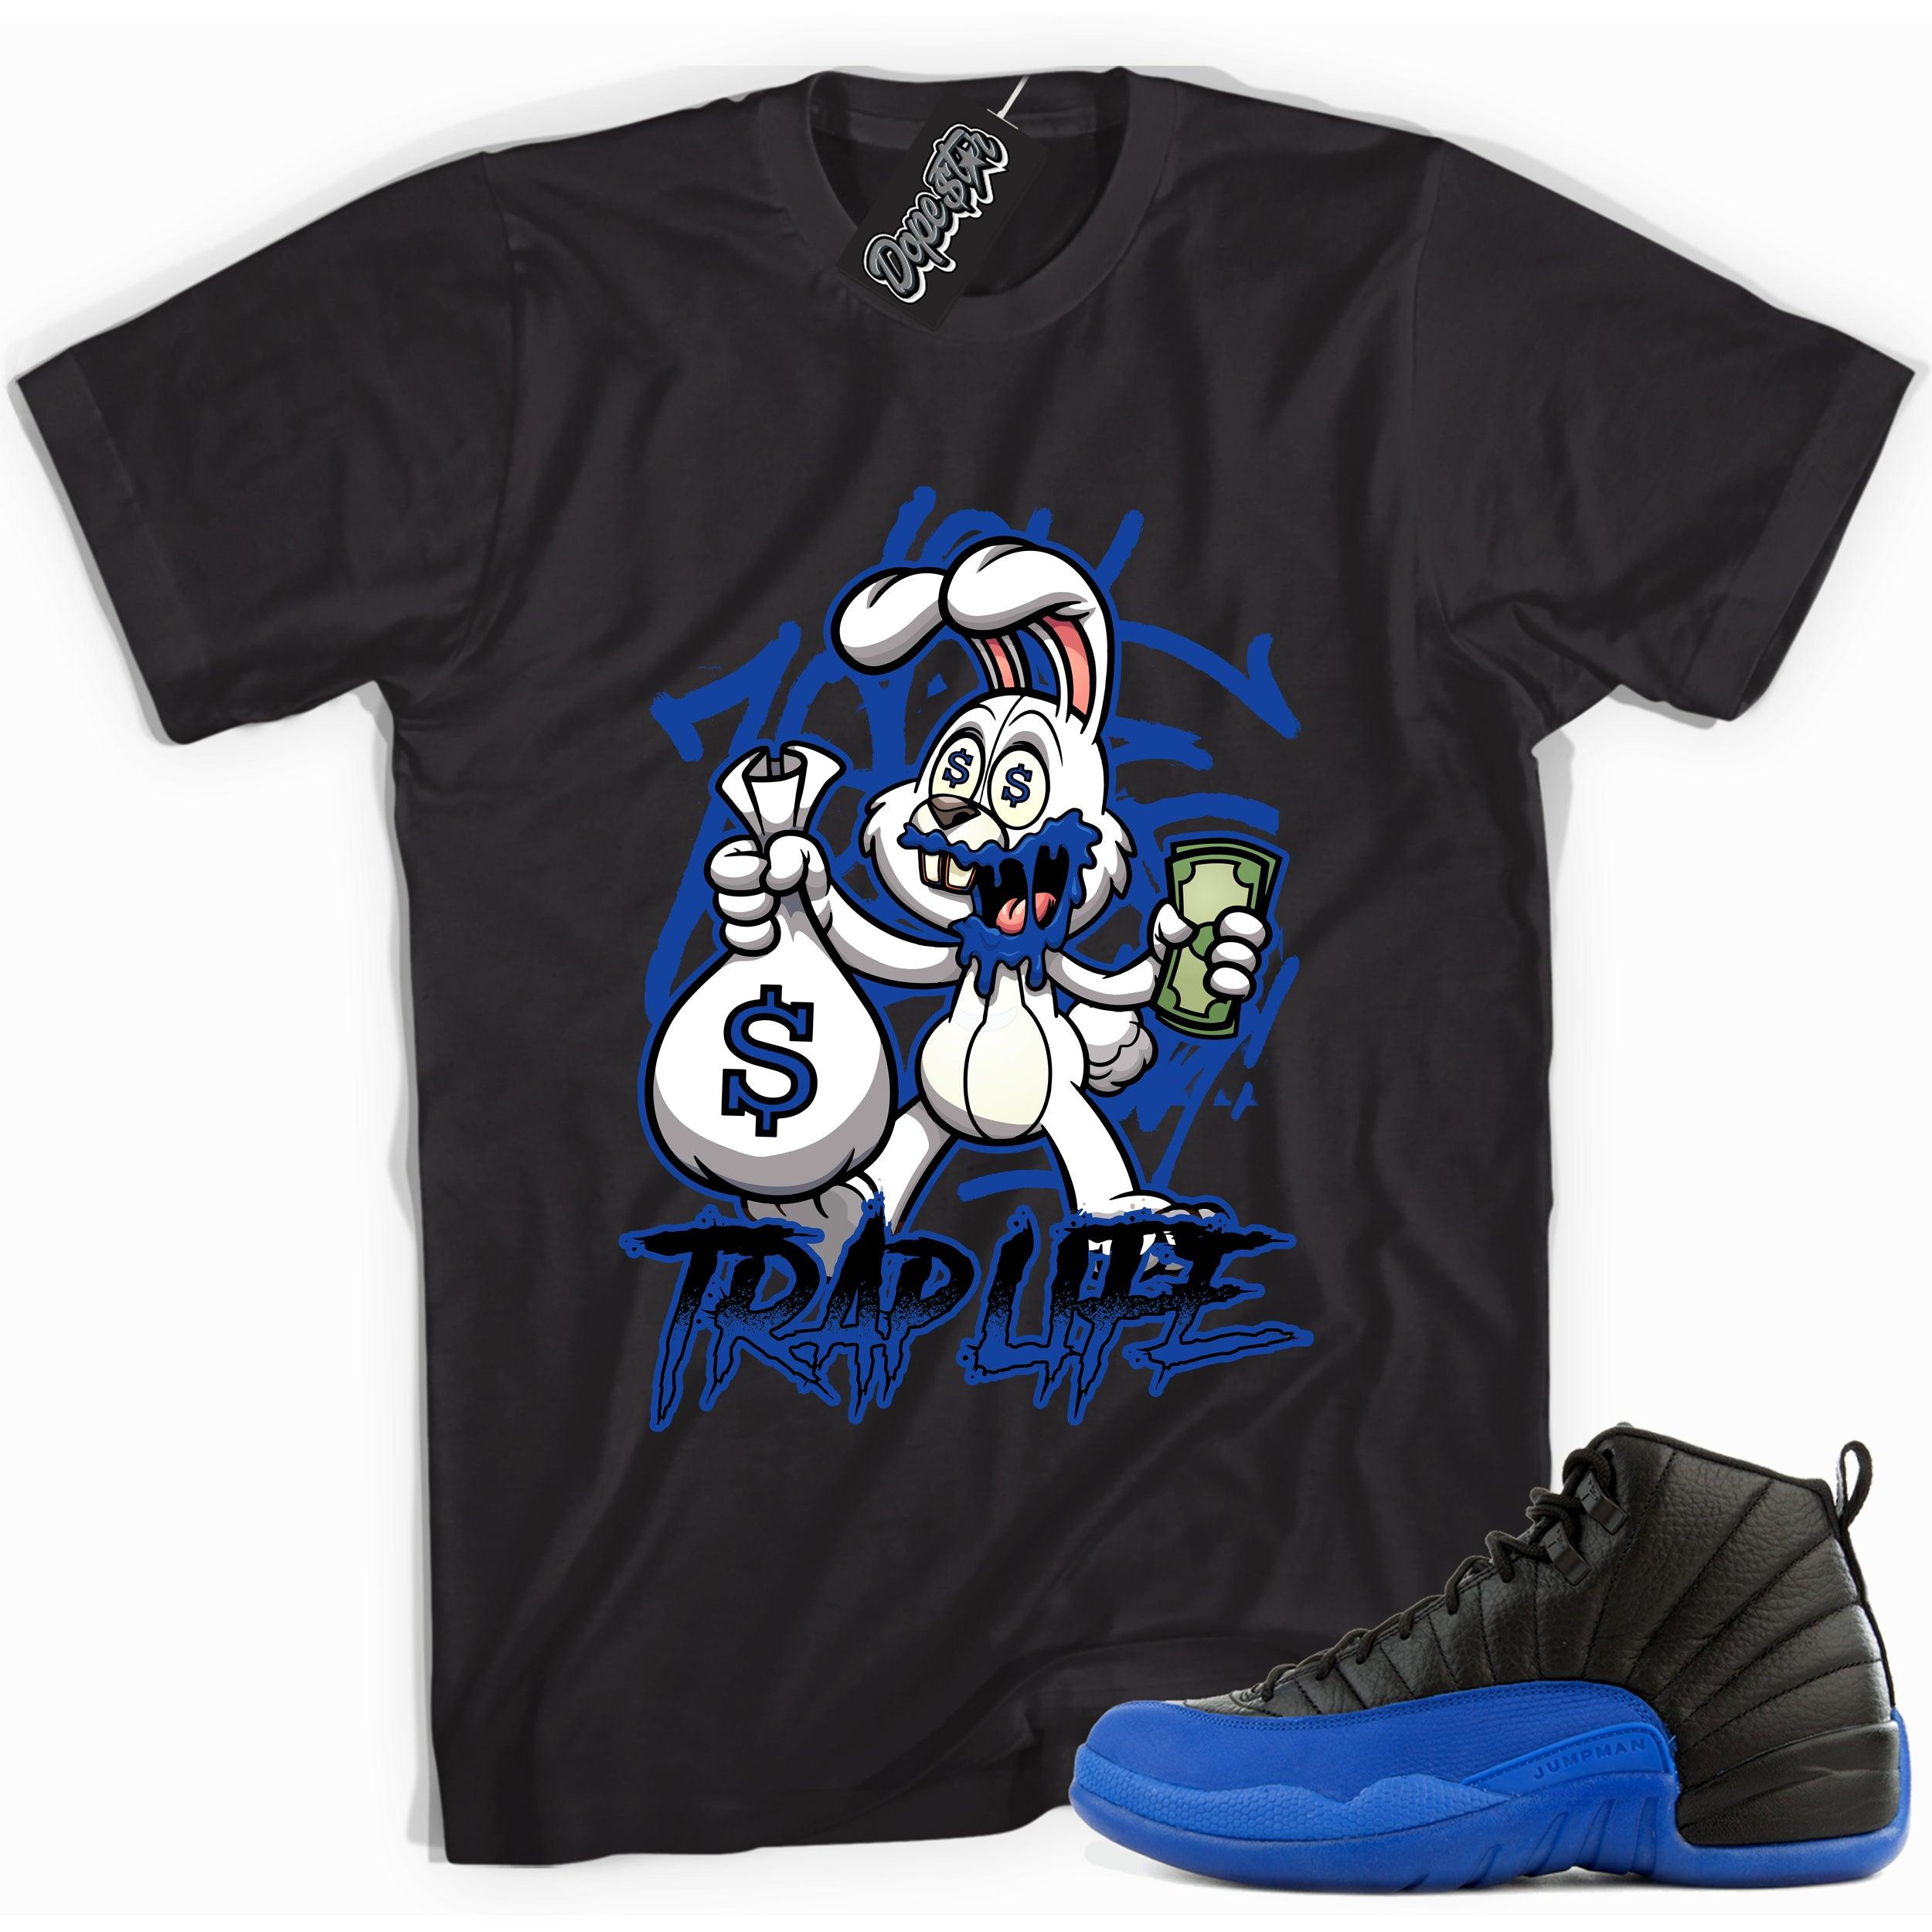 Cool black graphic tee with 'trap rabbit' print, that perfectly matches  Air Jordan 12 Retro Black Game Royal sneakers.